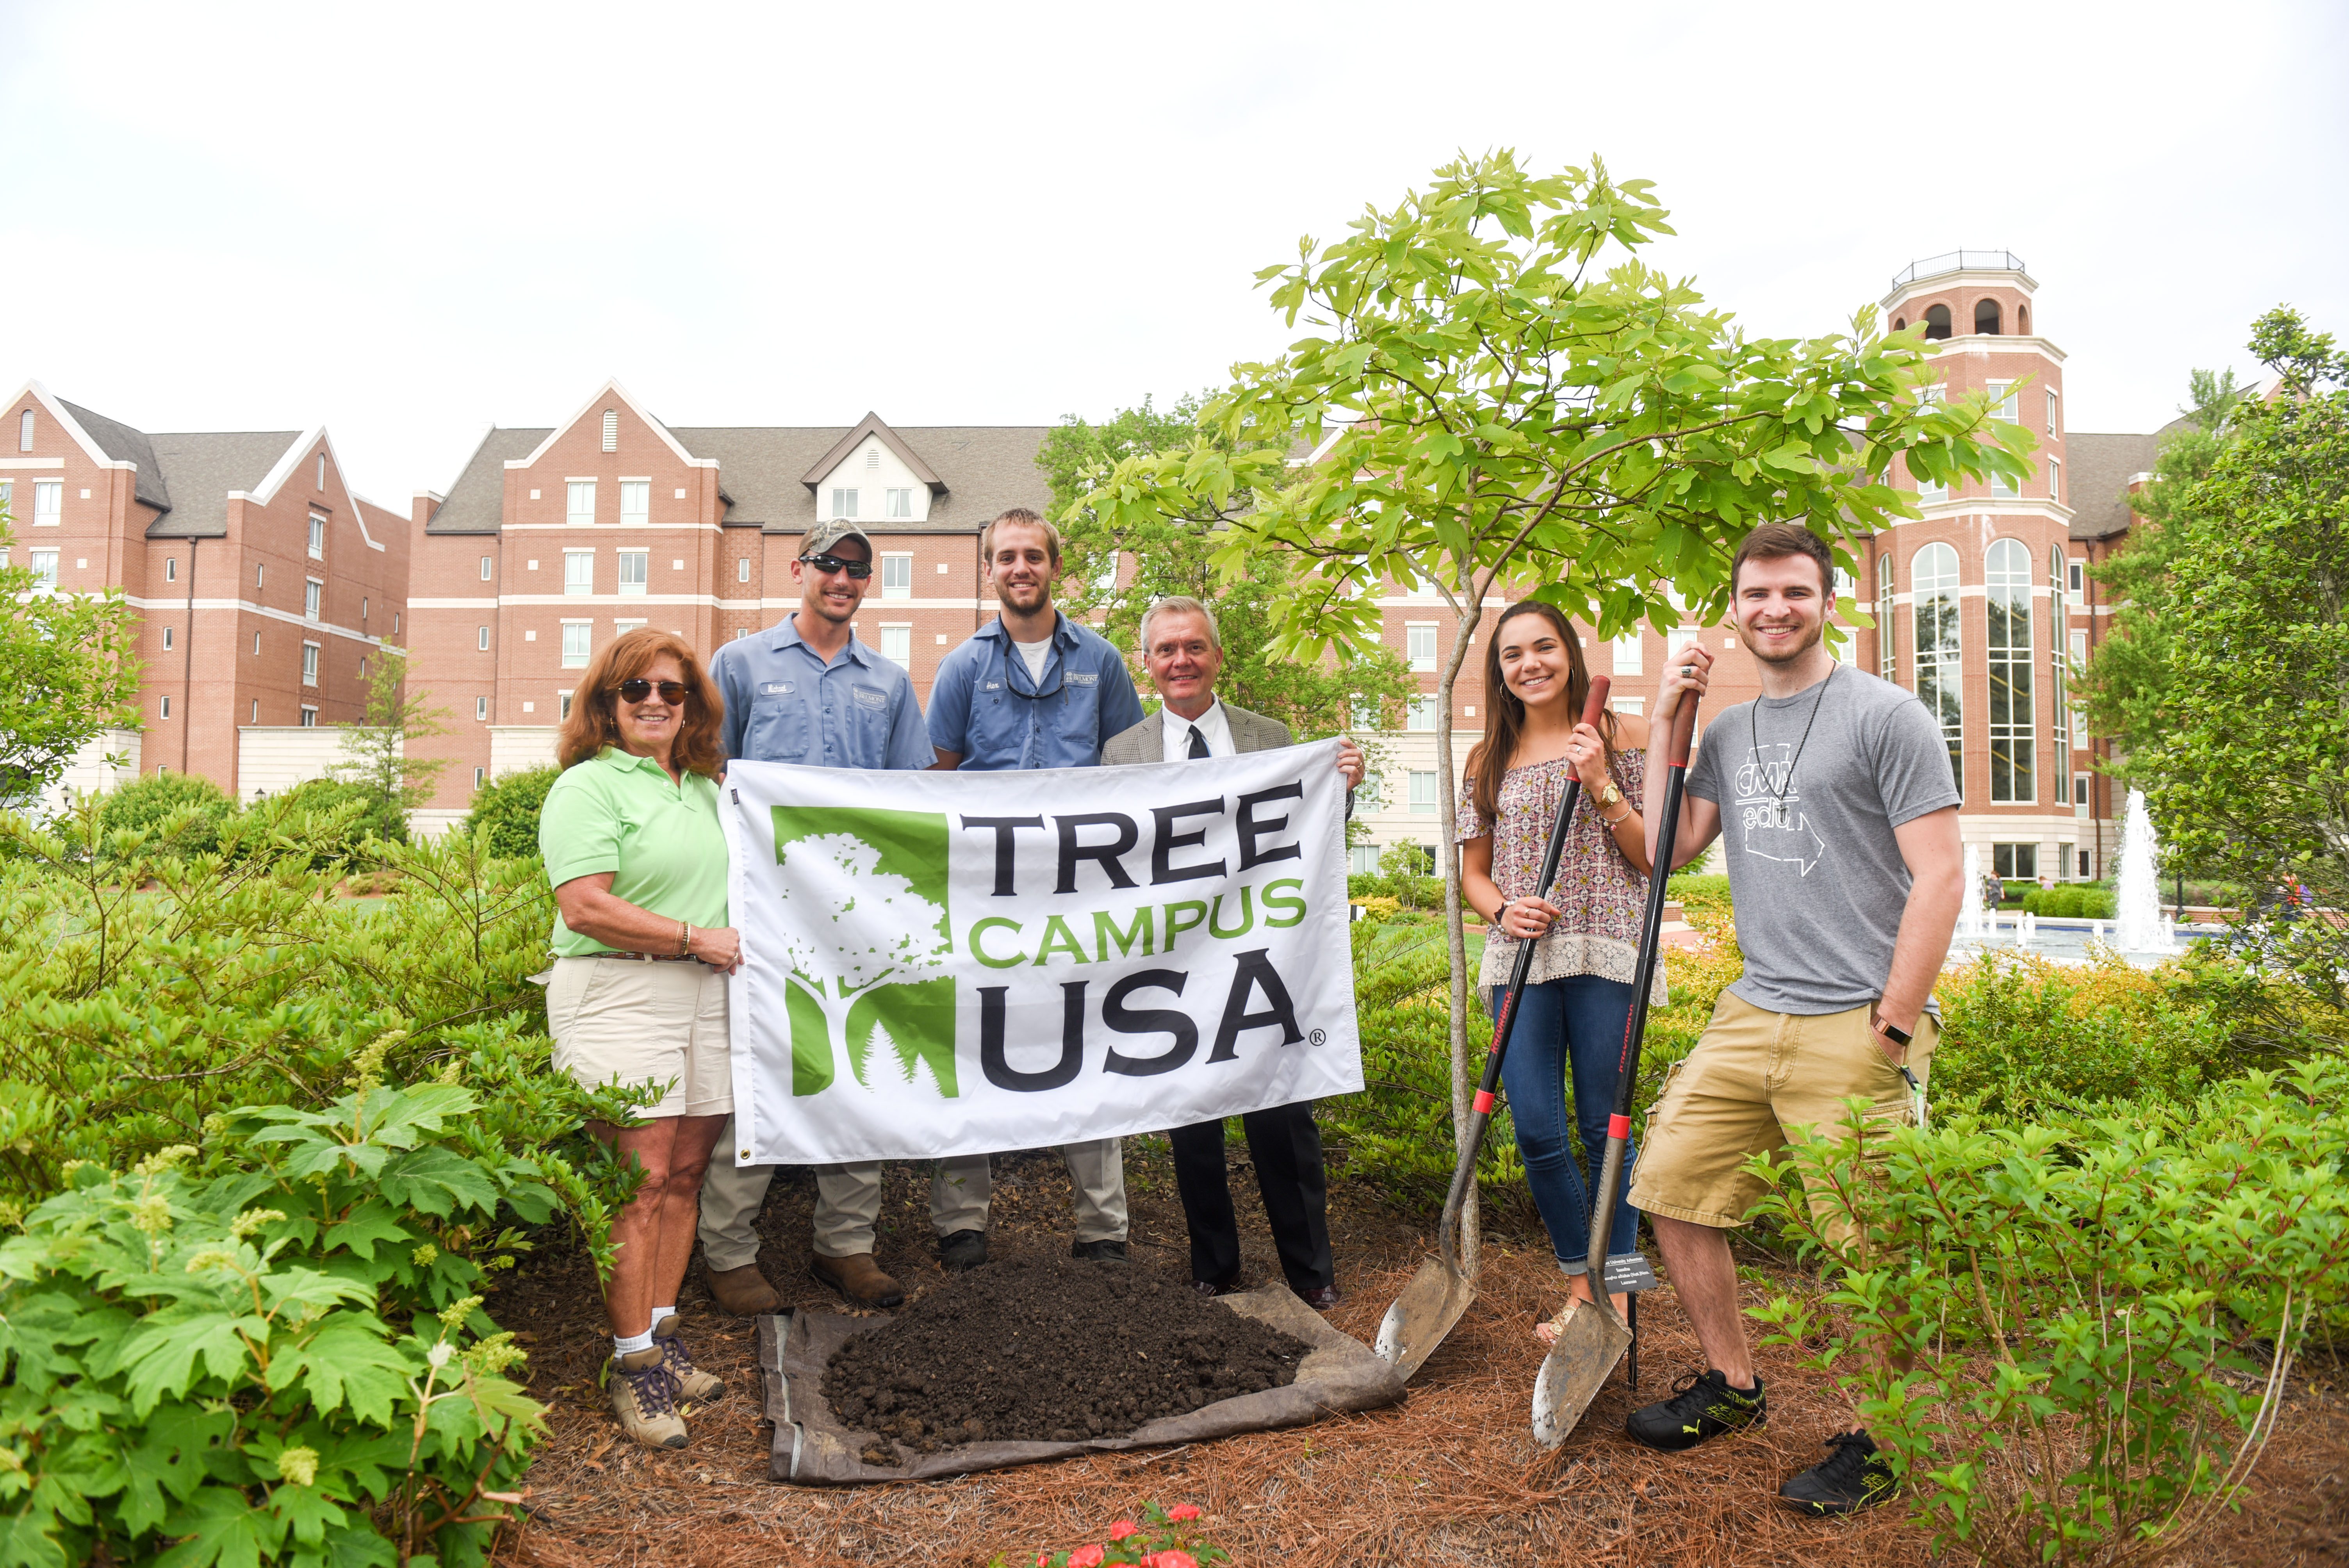 Students and staff pose for a picture in front of a sassafras tree and the USA Tree Campus sign.